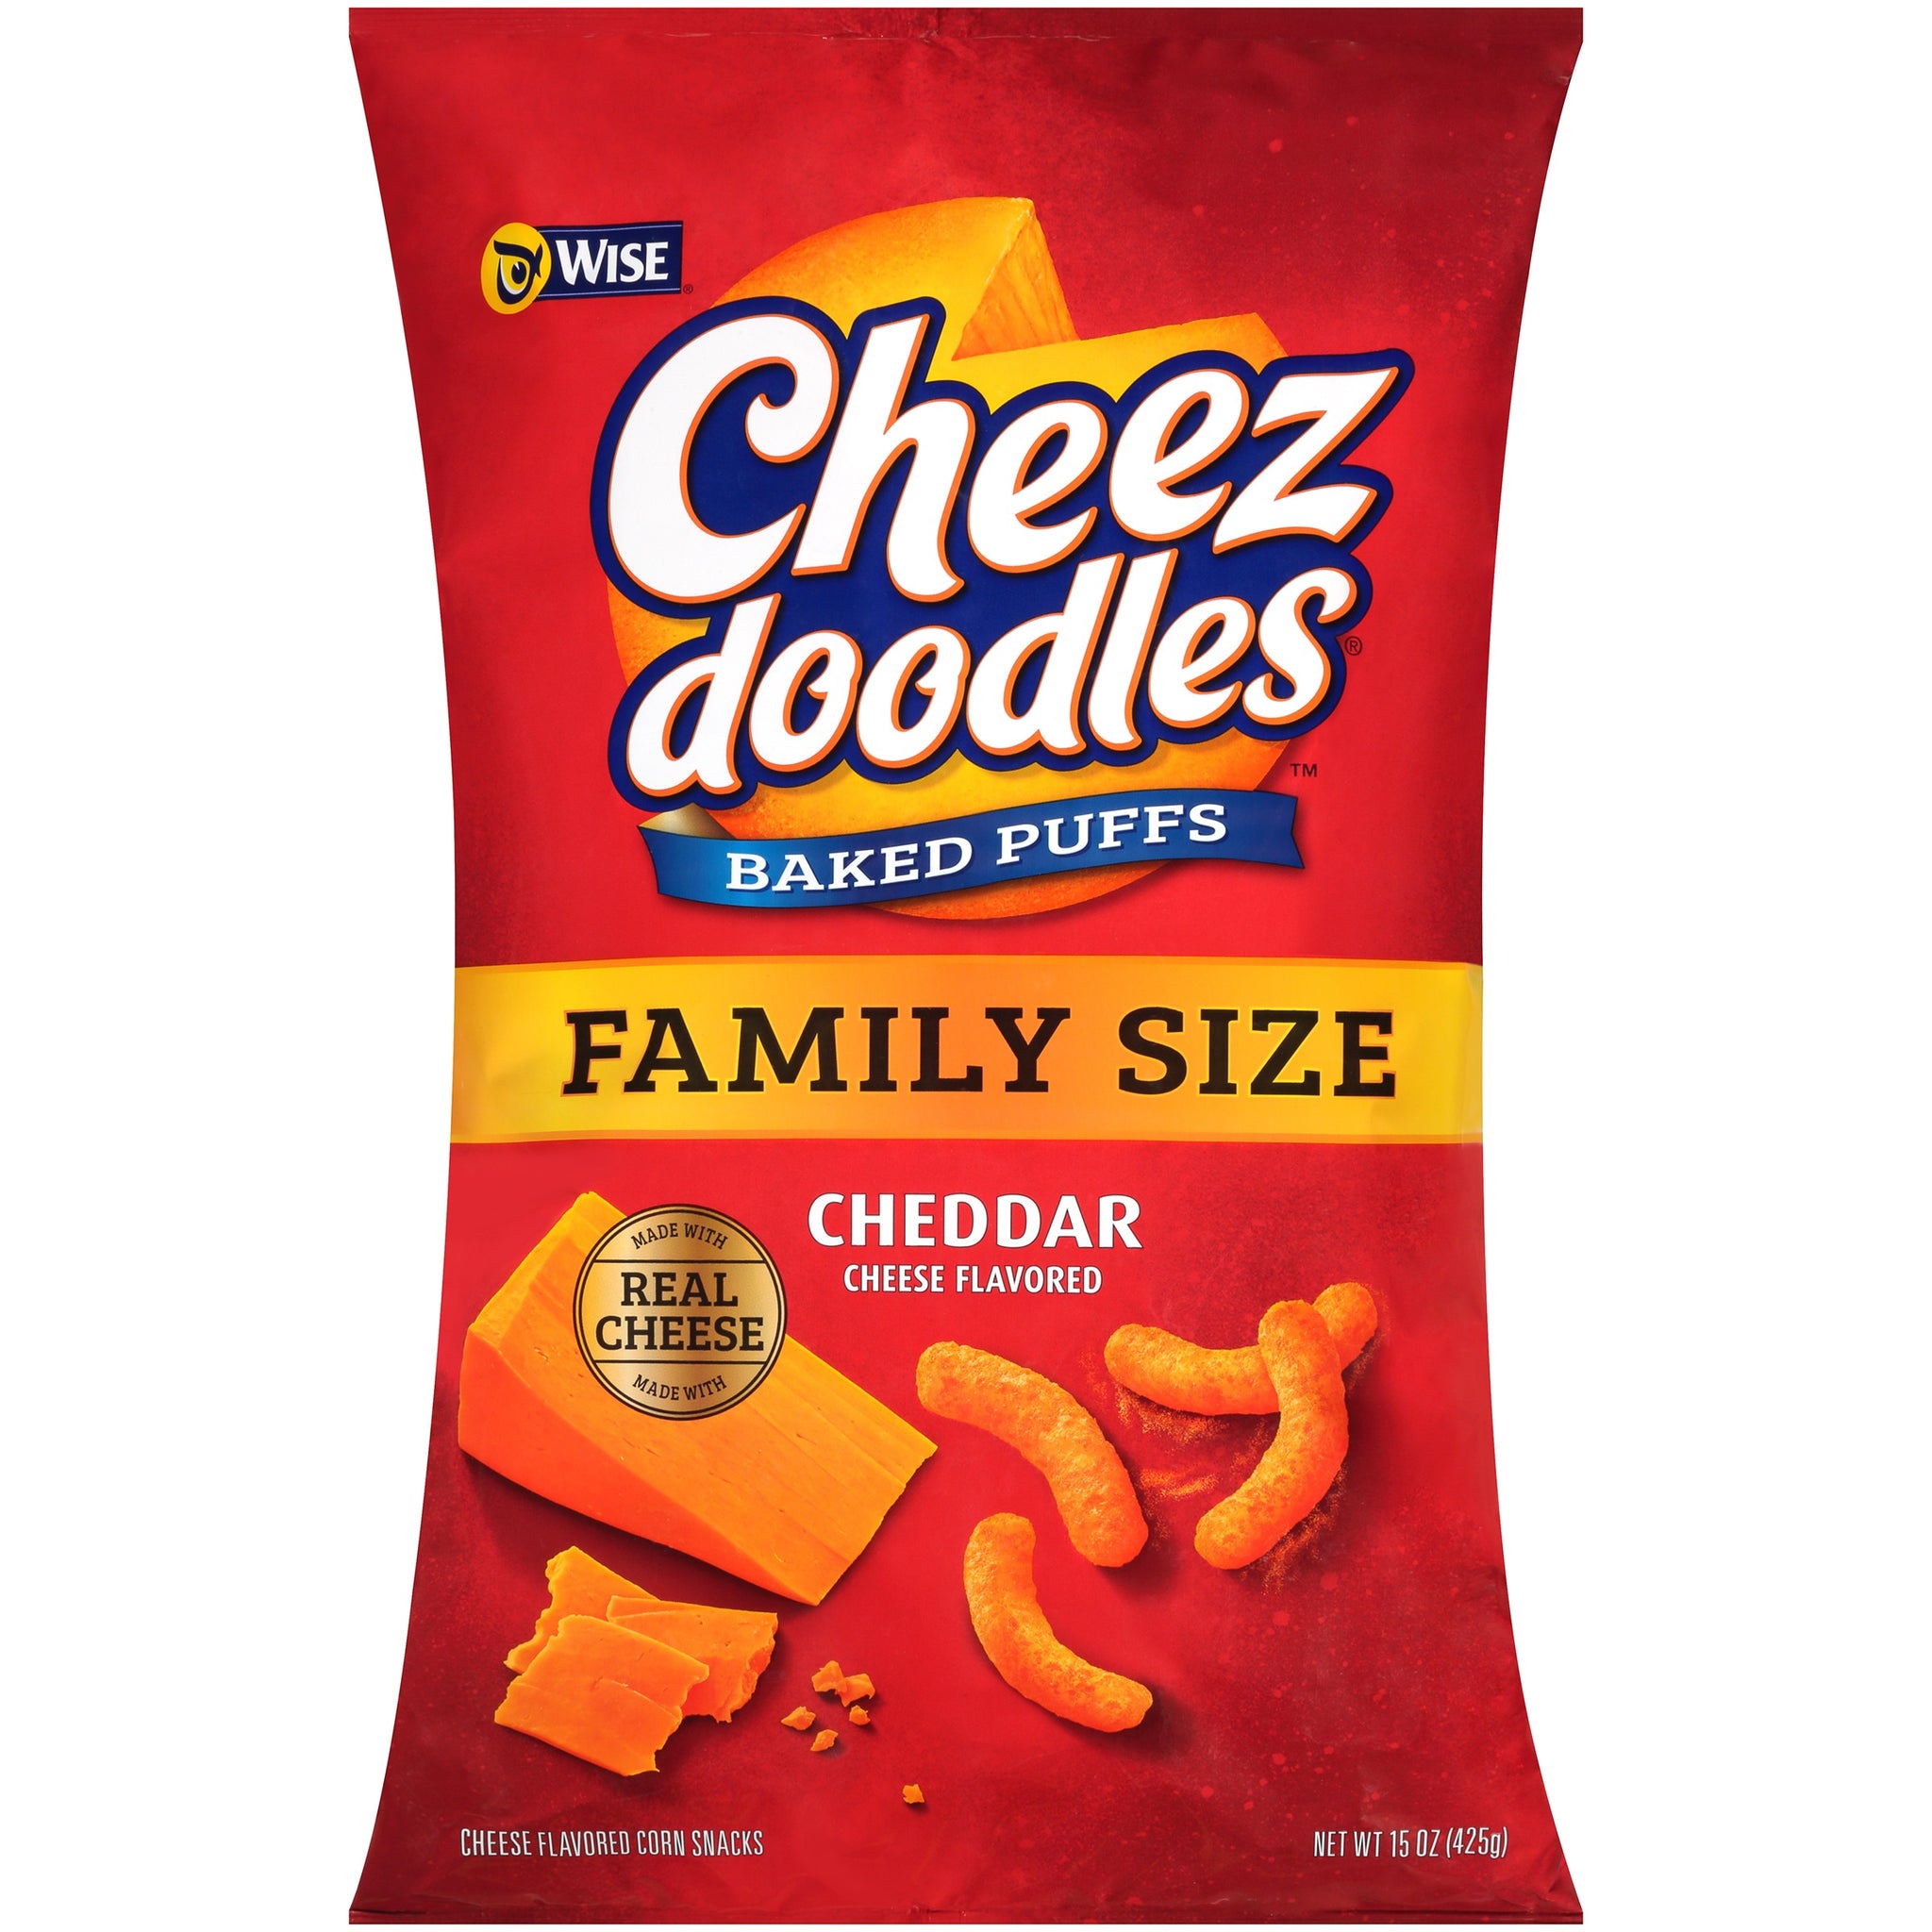 Wise Cheez Doodles Baked Puffed Cheddar Cheese Flavored Corn Snacks Family Size